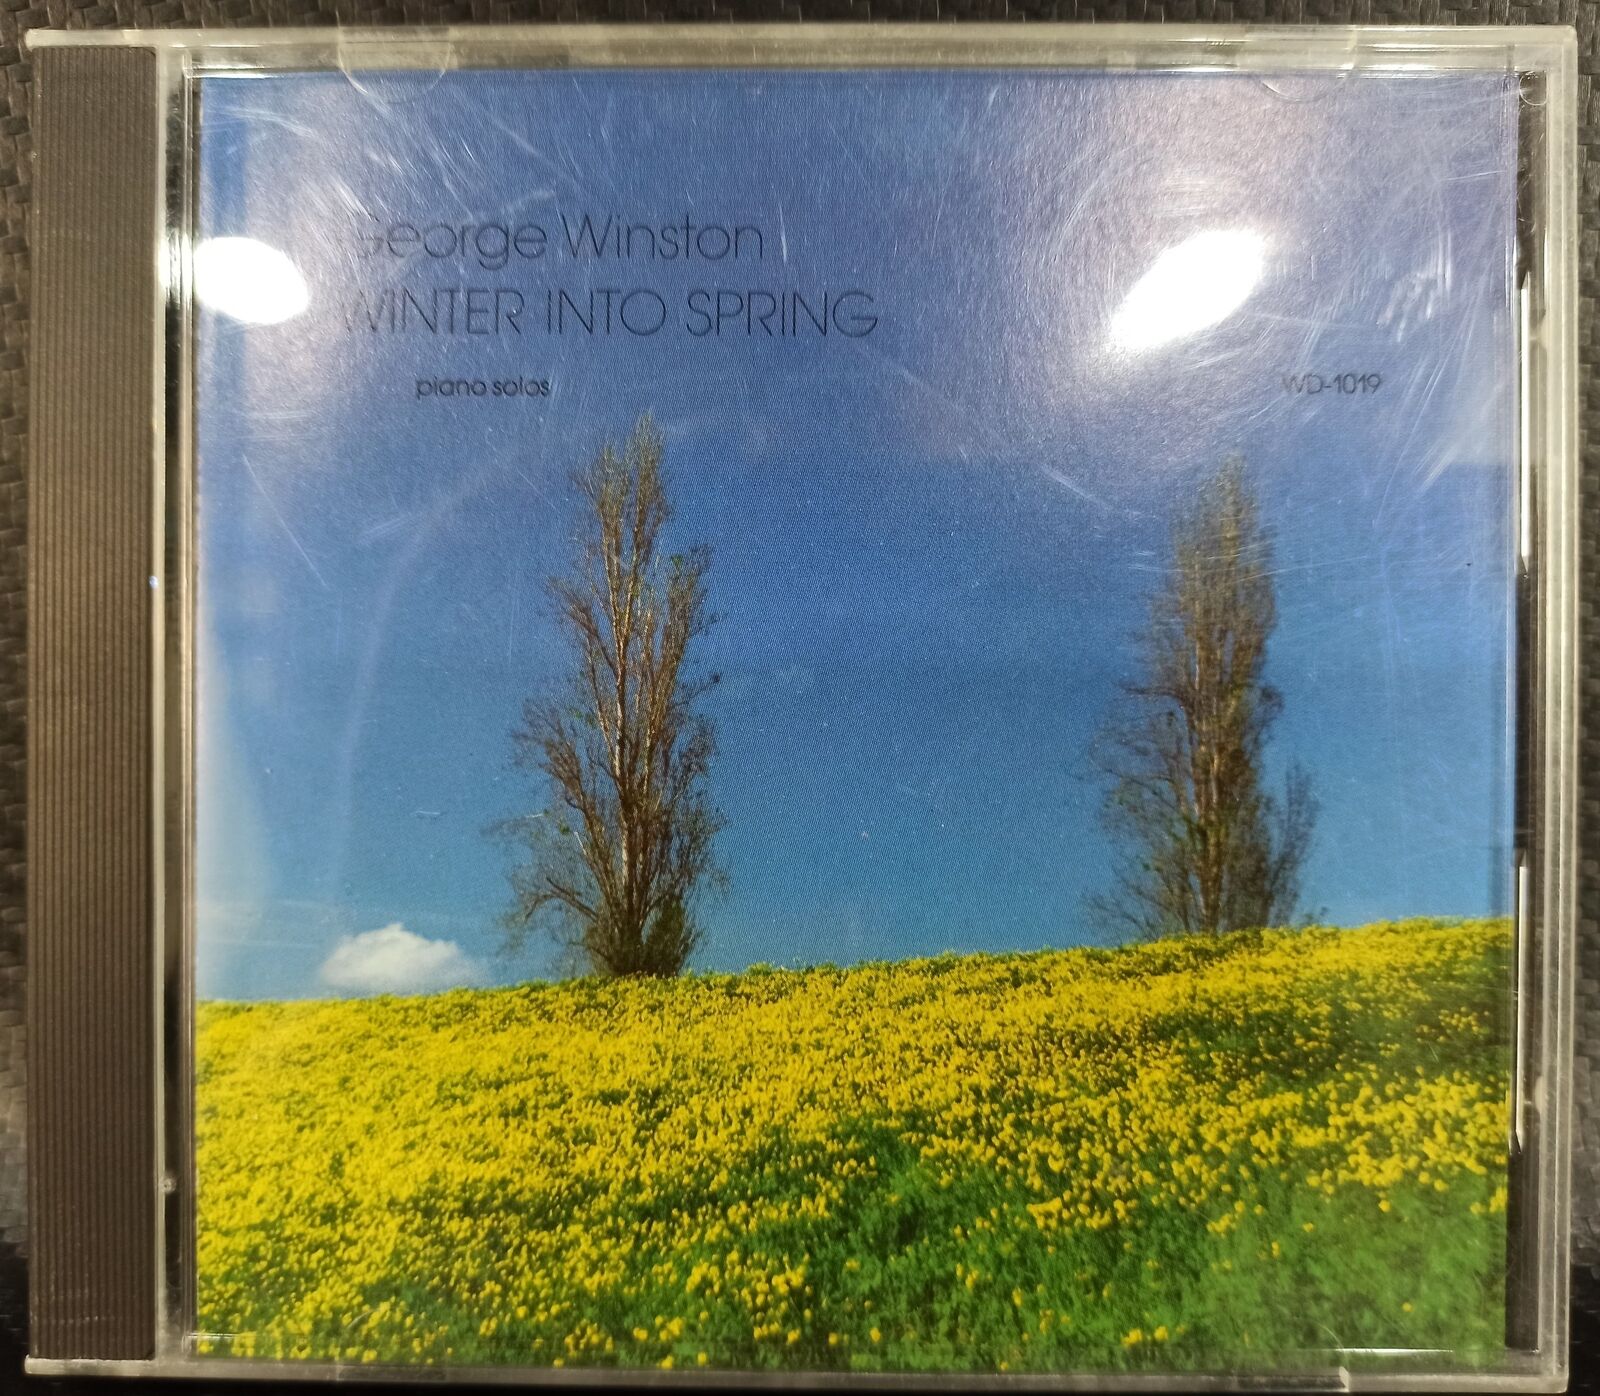 Winter into Spring by George Winston (CD, 1995, Windham Hill Records)